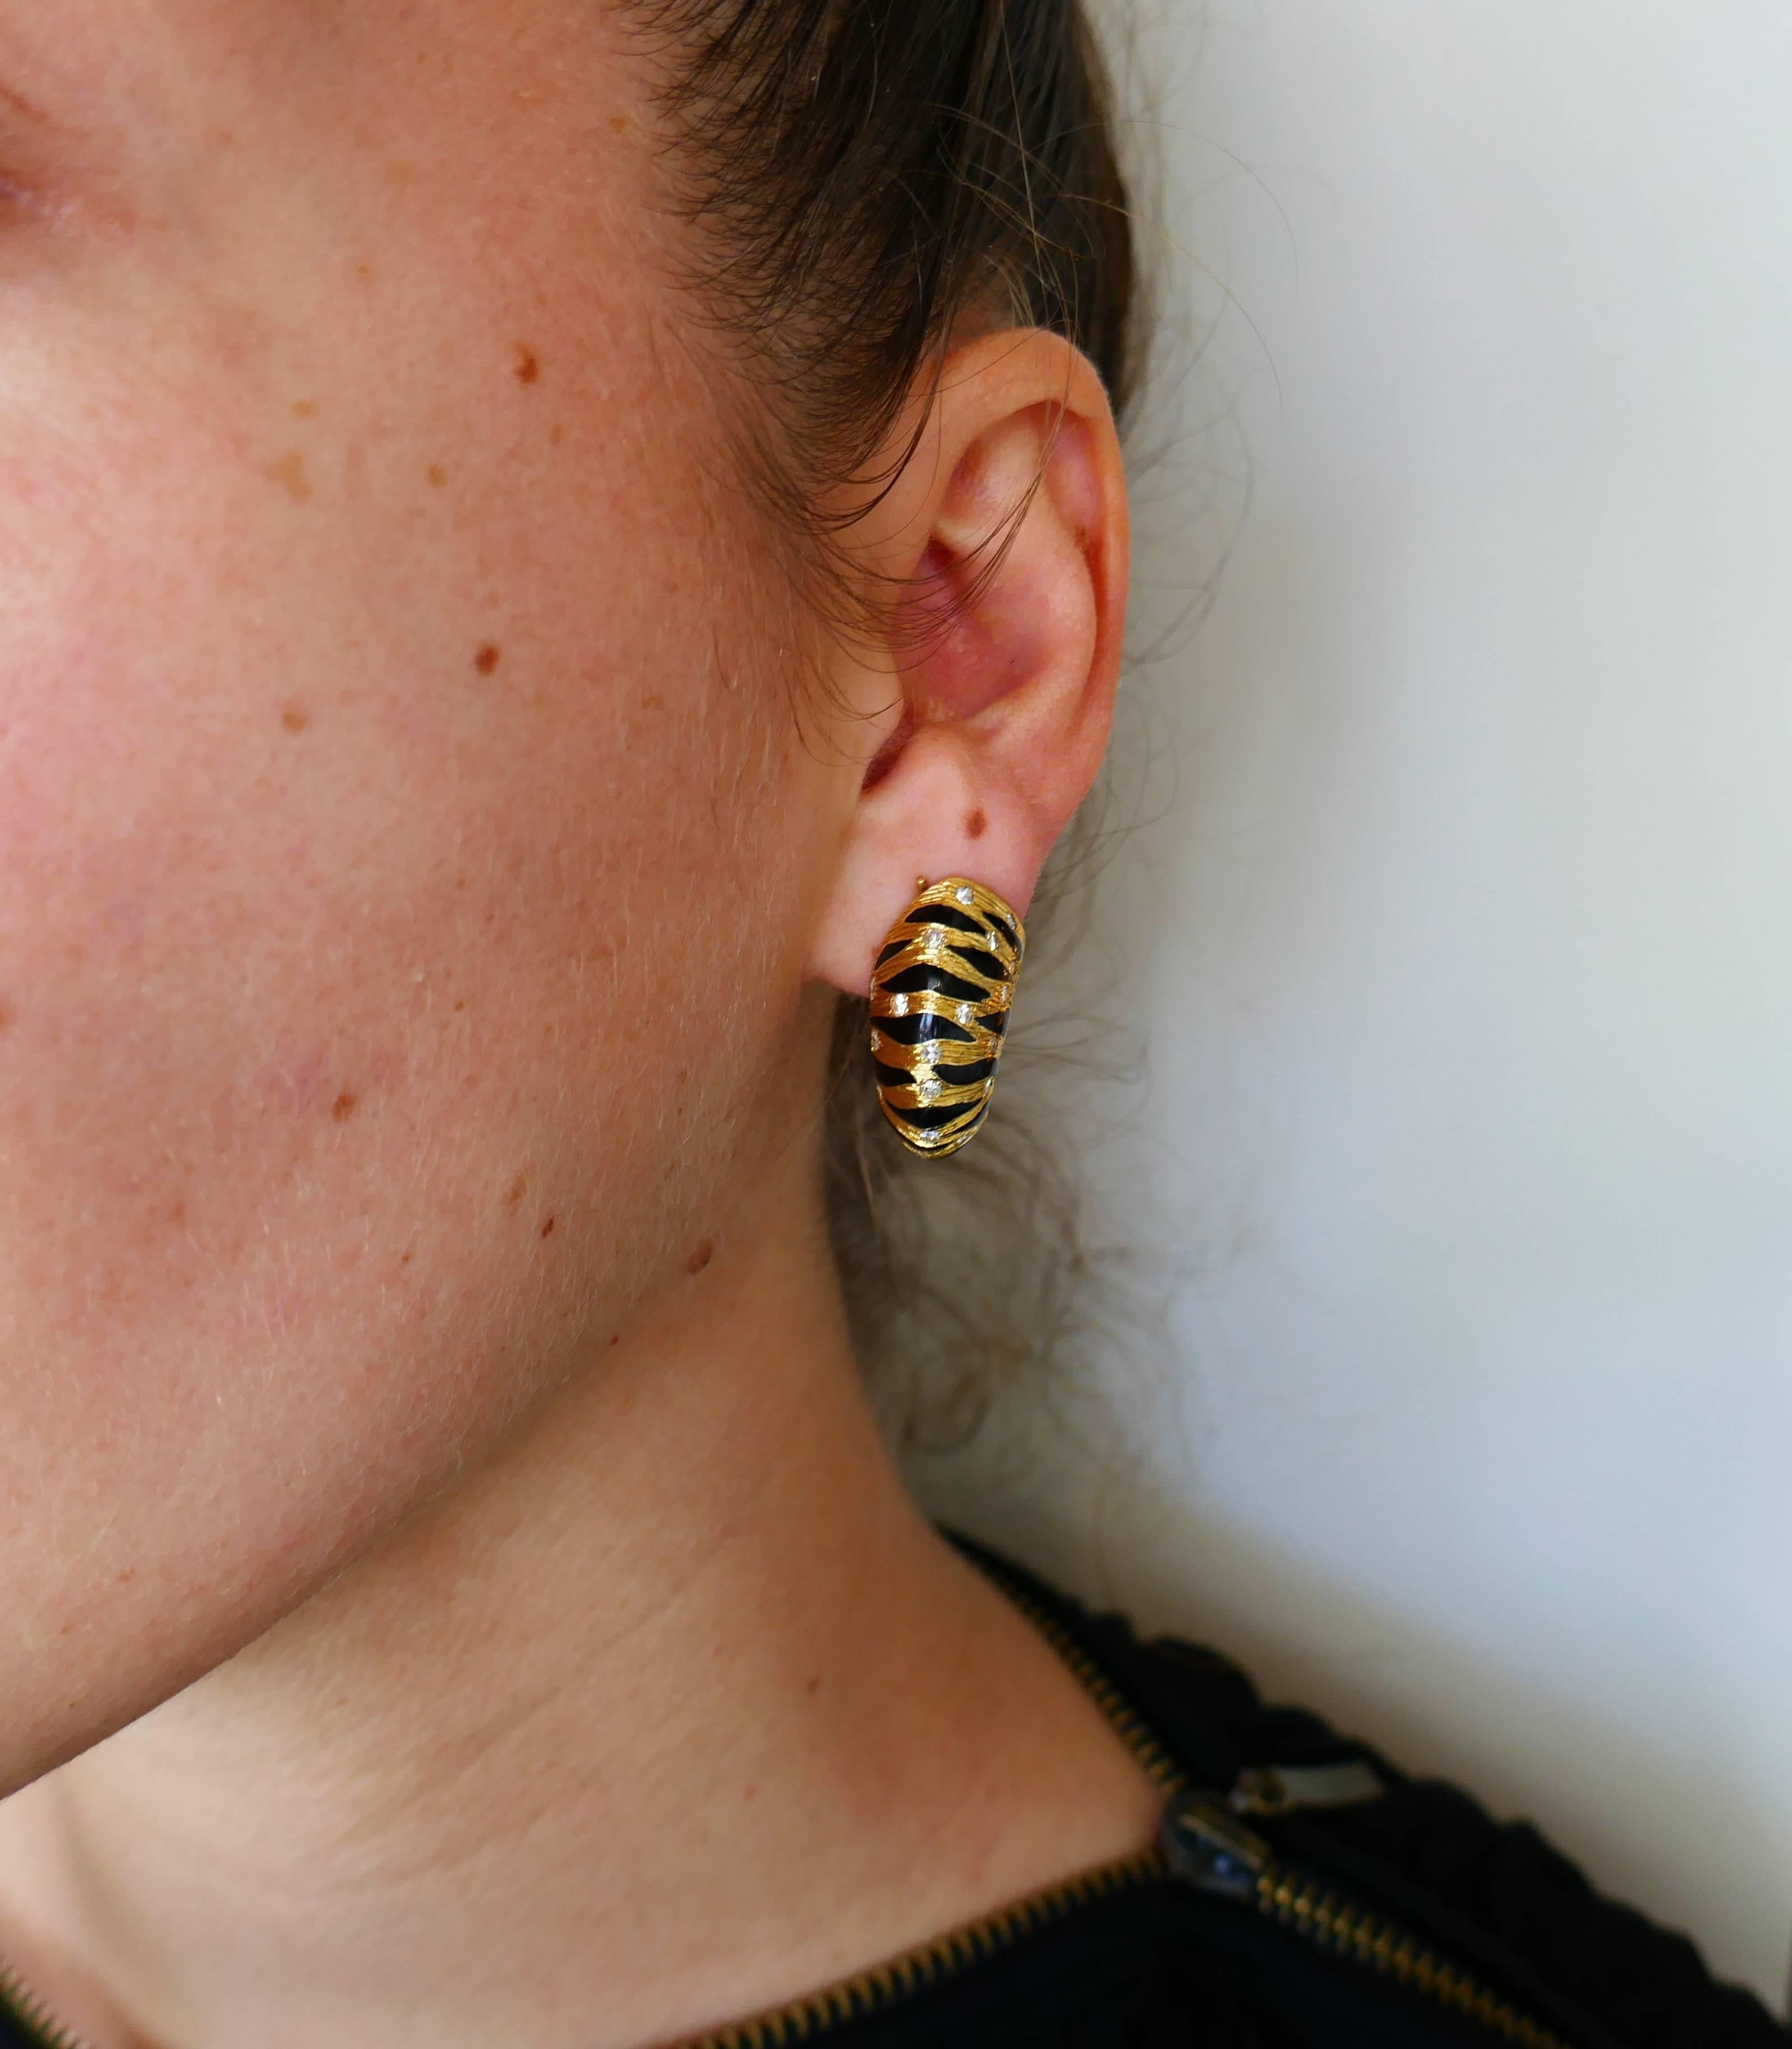 Edgy yet elegant pair of earrings created by Fred, Paris in the 1980s.  Stylish, French chic and wearable, the earrings are a great addition to your jewelry collection. 
They are made of 18 karat yellow gold, black enamel and accented with a round